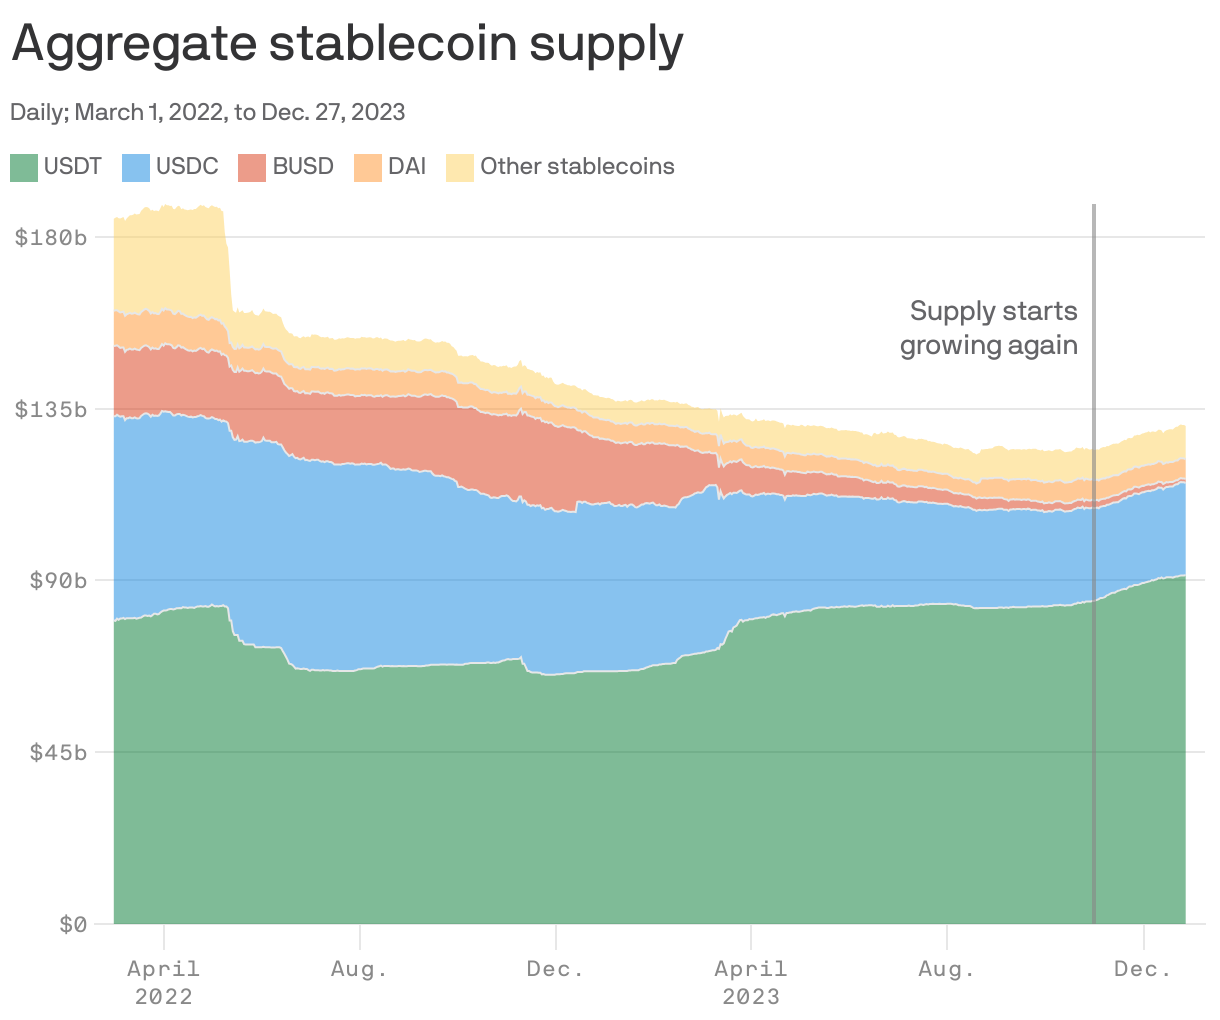 Aggregate stablecoin supply